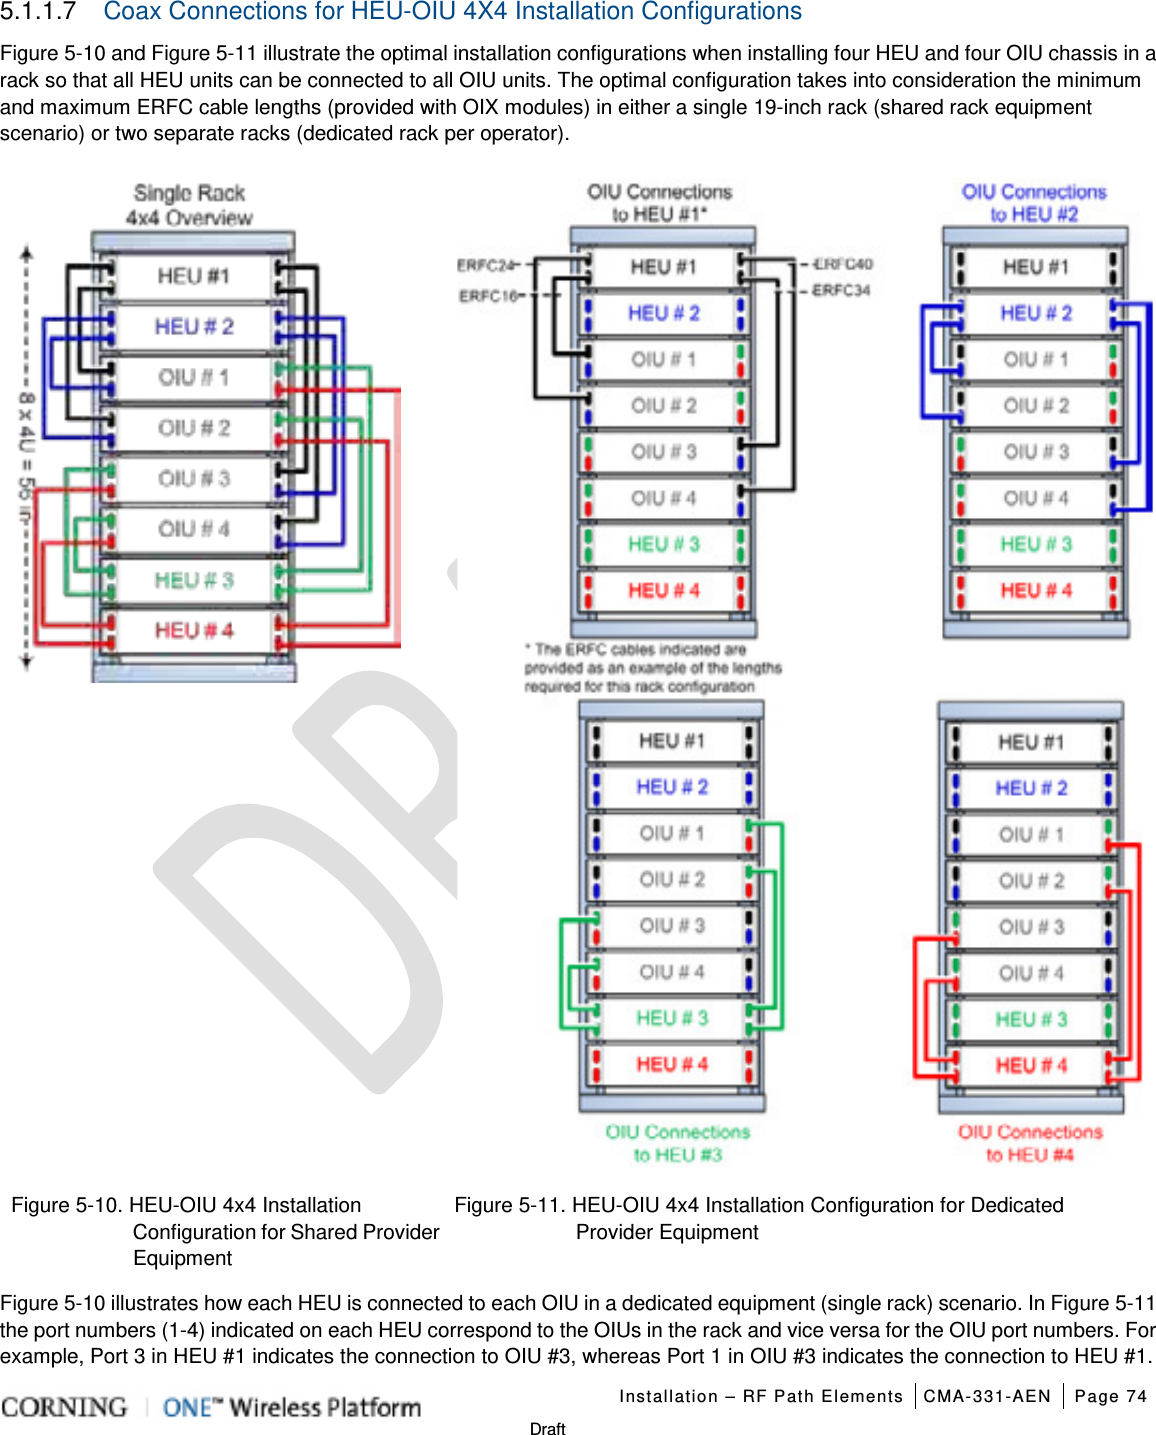   Installation – RF Path Elements CMA-331-AEN Page 74   Draft 5.1.1.7  Coax Connections for HEU-OIU 4X4 Installation Configurations Figure  5-10 and Figure  5-11 illustrate the optimal installation configurations when installing four HEU and four OIU chassis in a rack so that all HEU units can be connected to all OIU units. The optimal configuration takes into consideration the minimum and maximum ERFC cable lengths (provided with OIX modules) in either a single 19-inch rack (shared rack equipment scenario) or two separate racks (dedicated rack per operator).    Figure  5-10. HEU-OIU 4x4 Installation Configuration for Shared Provider Equipment Figure  5-11. HEU-OIU 4x4 Installation Configuration for Dedicated   Provider Equipment Figure  5-10 illustrates how each HEU is connected to each OIU in a dedicated equipment (single rack) scenario. In Figure  5-11 the port numbers (1-4) indicated on each HEU correspond to the OIUs in the rack and vice versa for the OIU port numbers. For example, Port 3 in HEU #1 indicates the connection to OIU #3, whereas Port 1 in OIU #3 indicates the connection to HEU #1. 